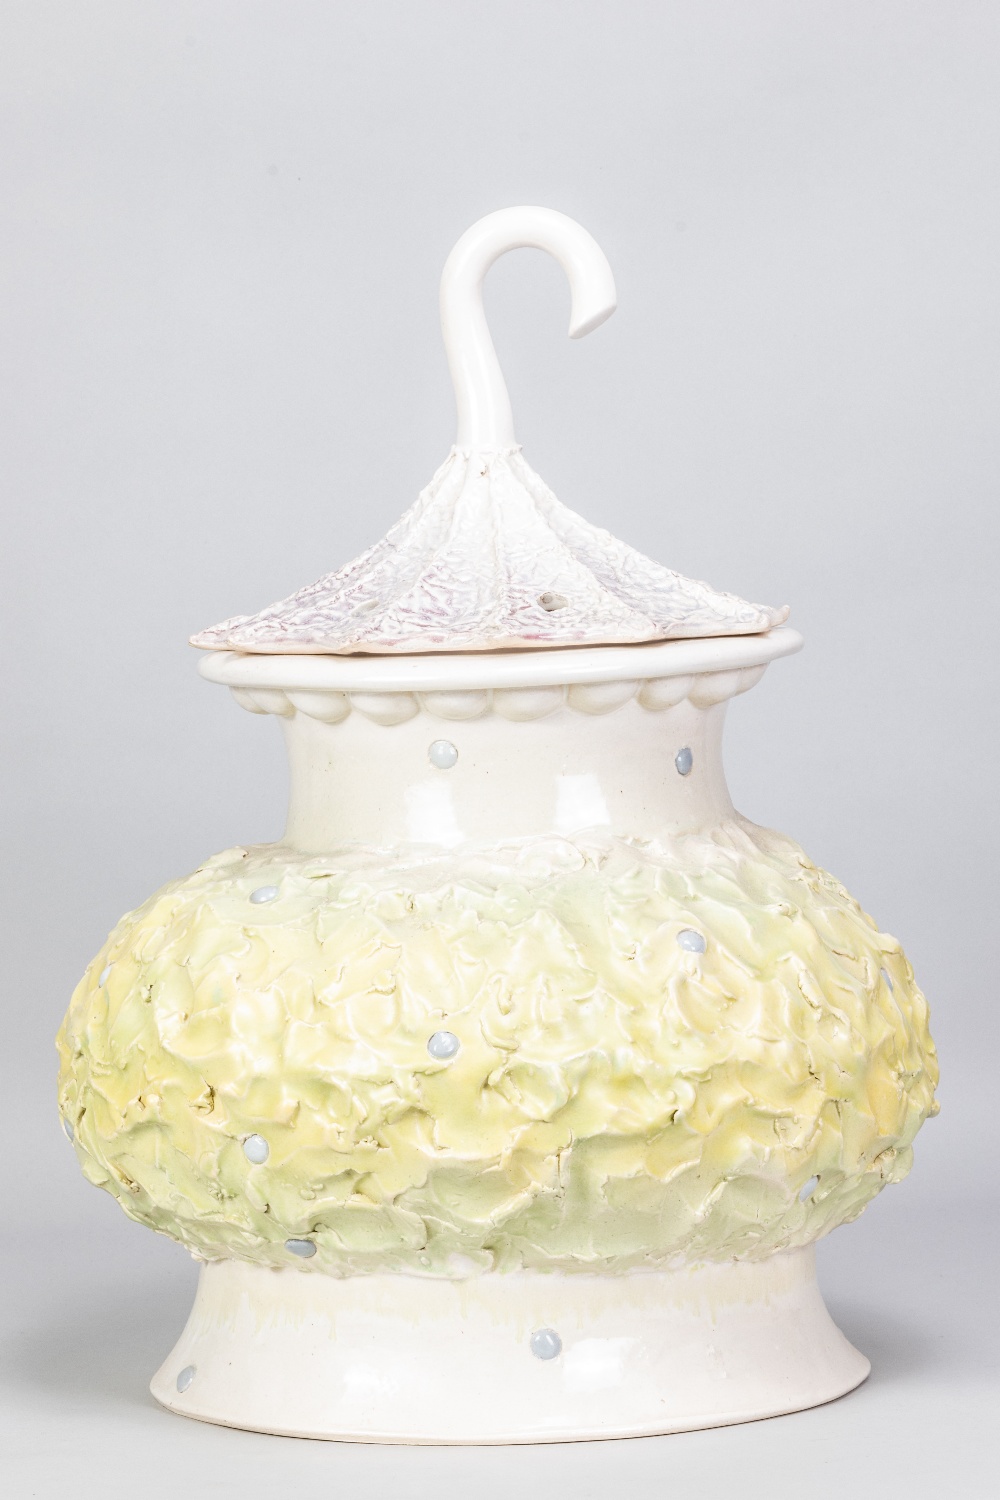 RICHARD SLEE (born 1946); a large earthenware pot and pierced cover with lime green belly and